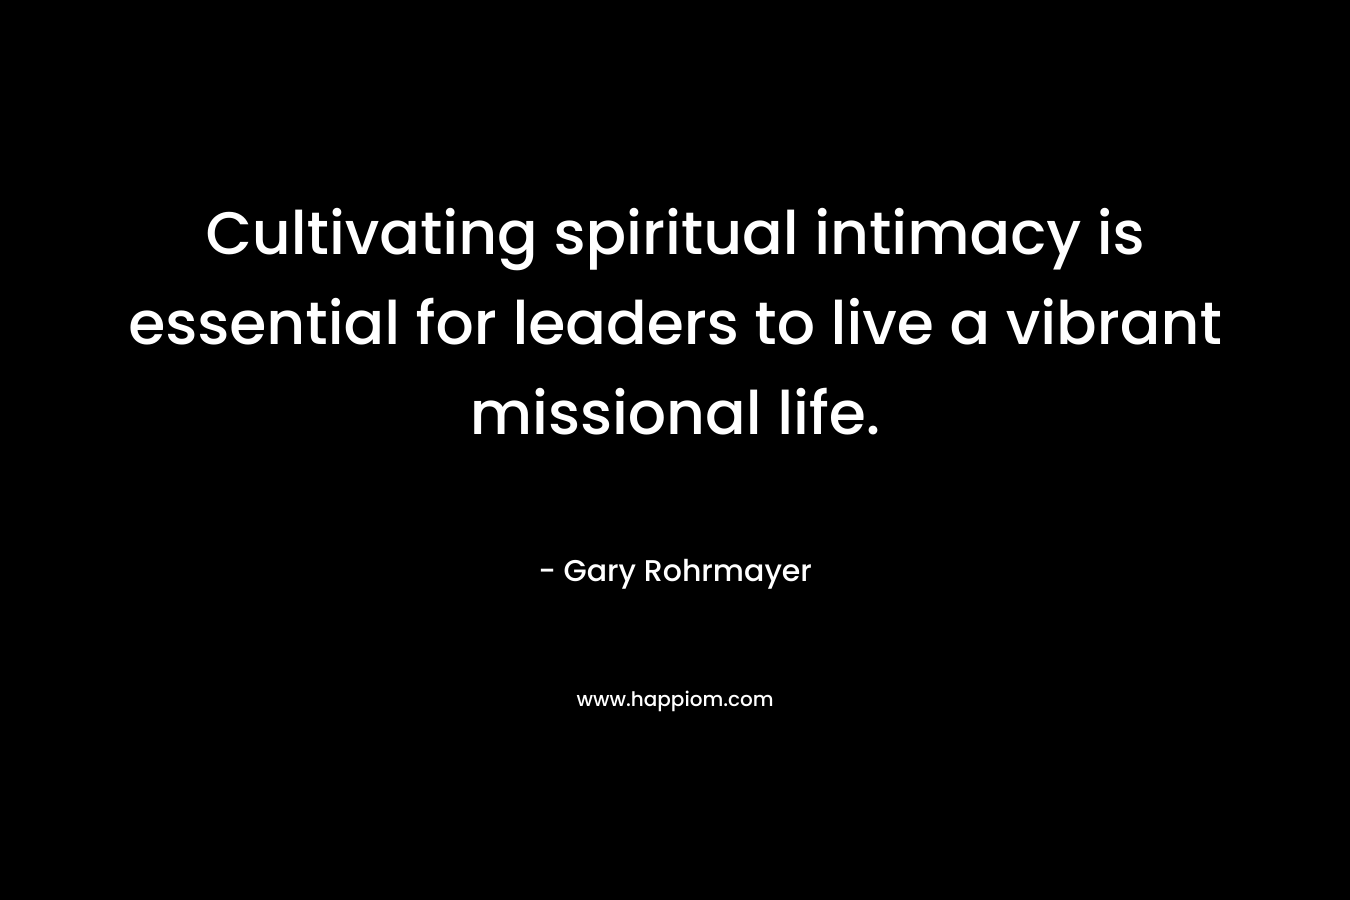 Cultivating spiritual intimacy is essential for leaders to live a vibrant missional life. – Gary Rohrmayer